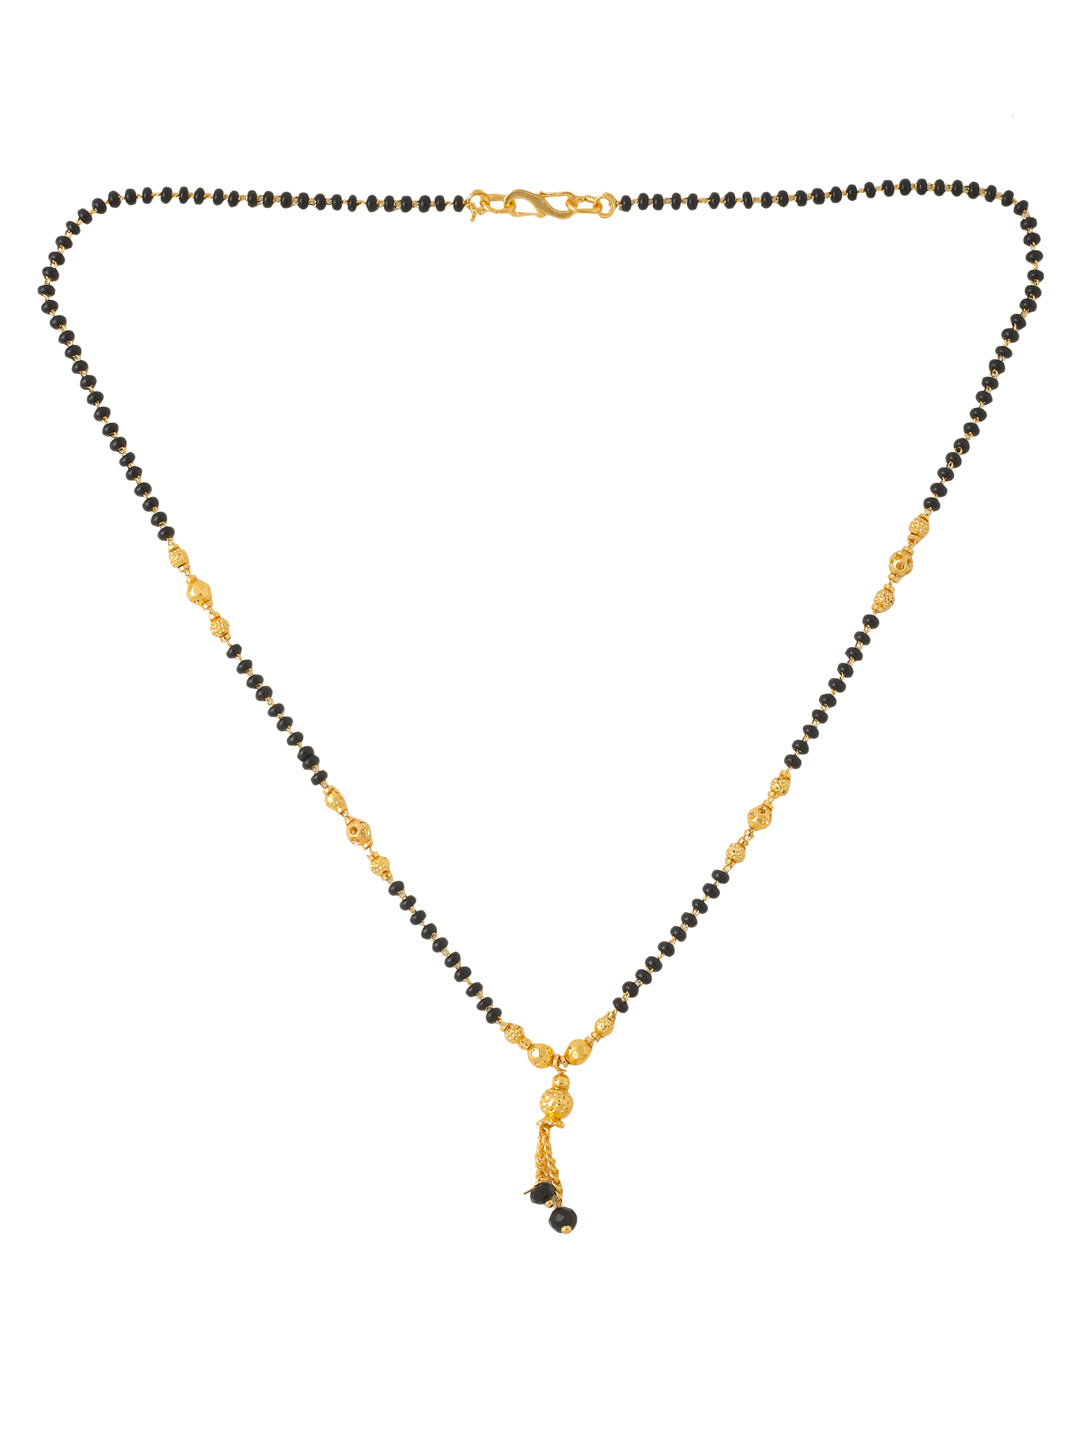 Women's Set Of 2 Black Gold-Plated Beaded Mangalsutra With Ad Stone - Nvr